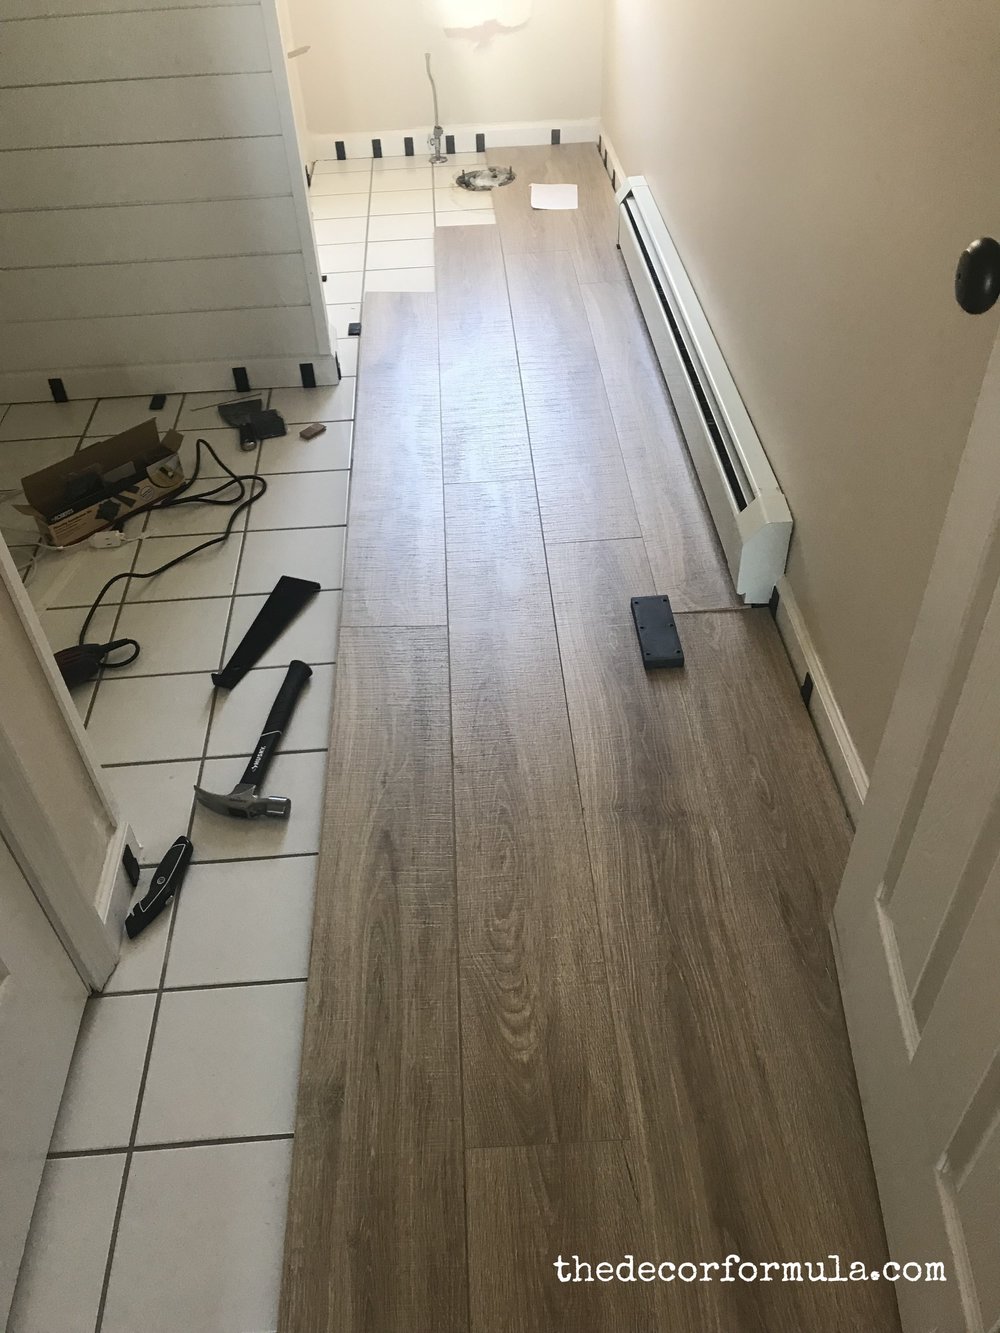 Ideas For Covering Up Tile Floors, Can I Install Laminate Flooring Over Tile